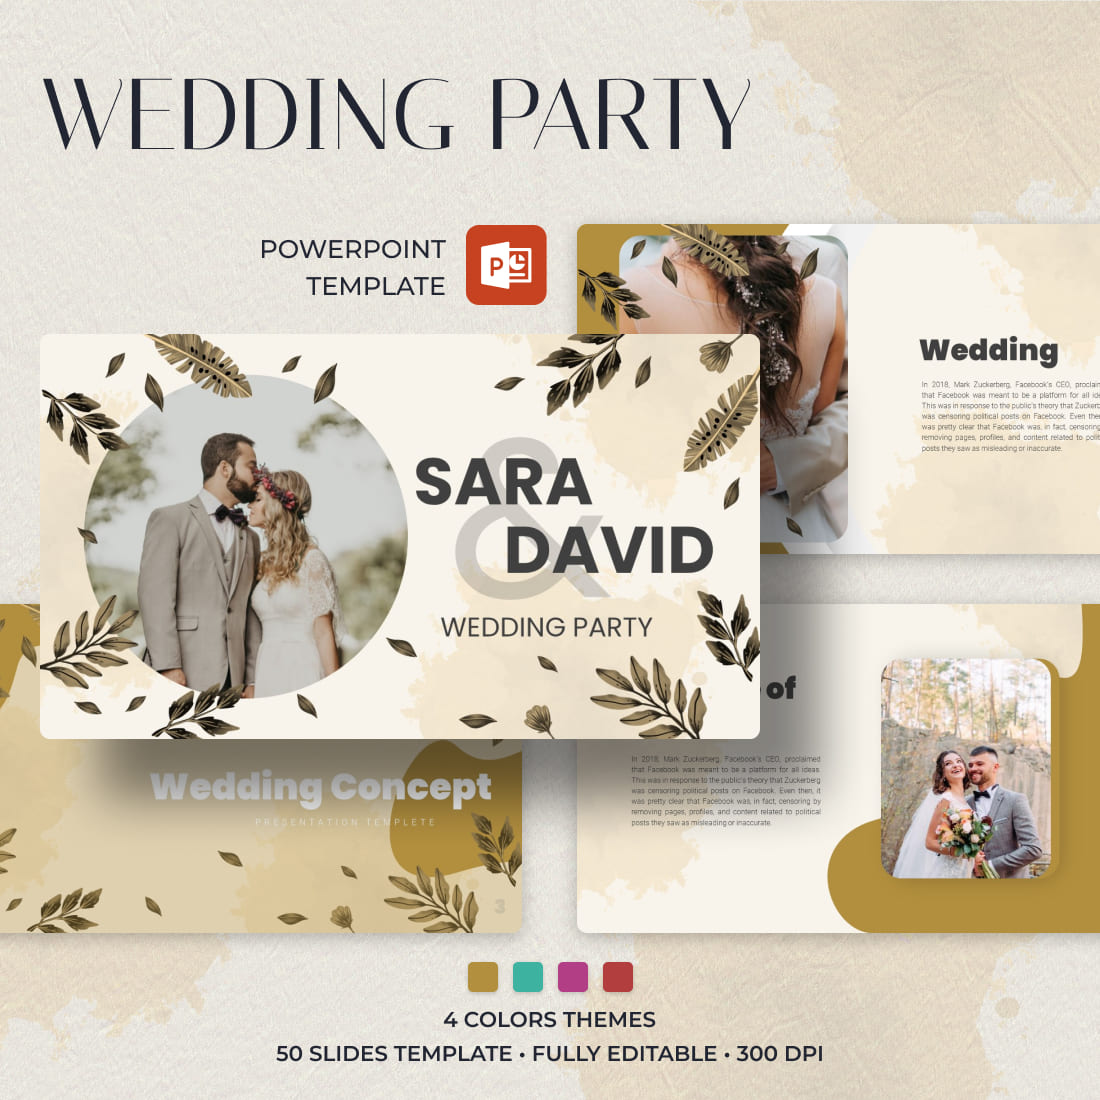 Wedding Party Powerpoint Template.